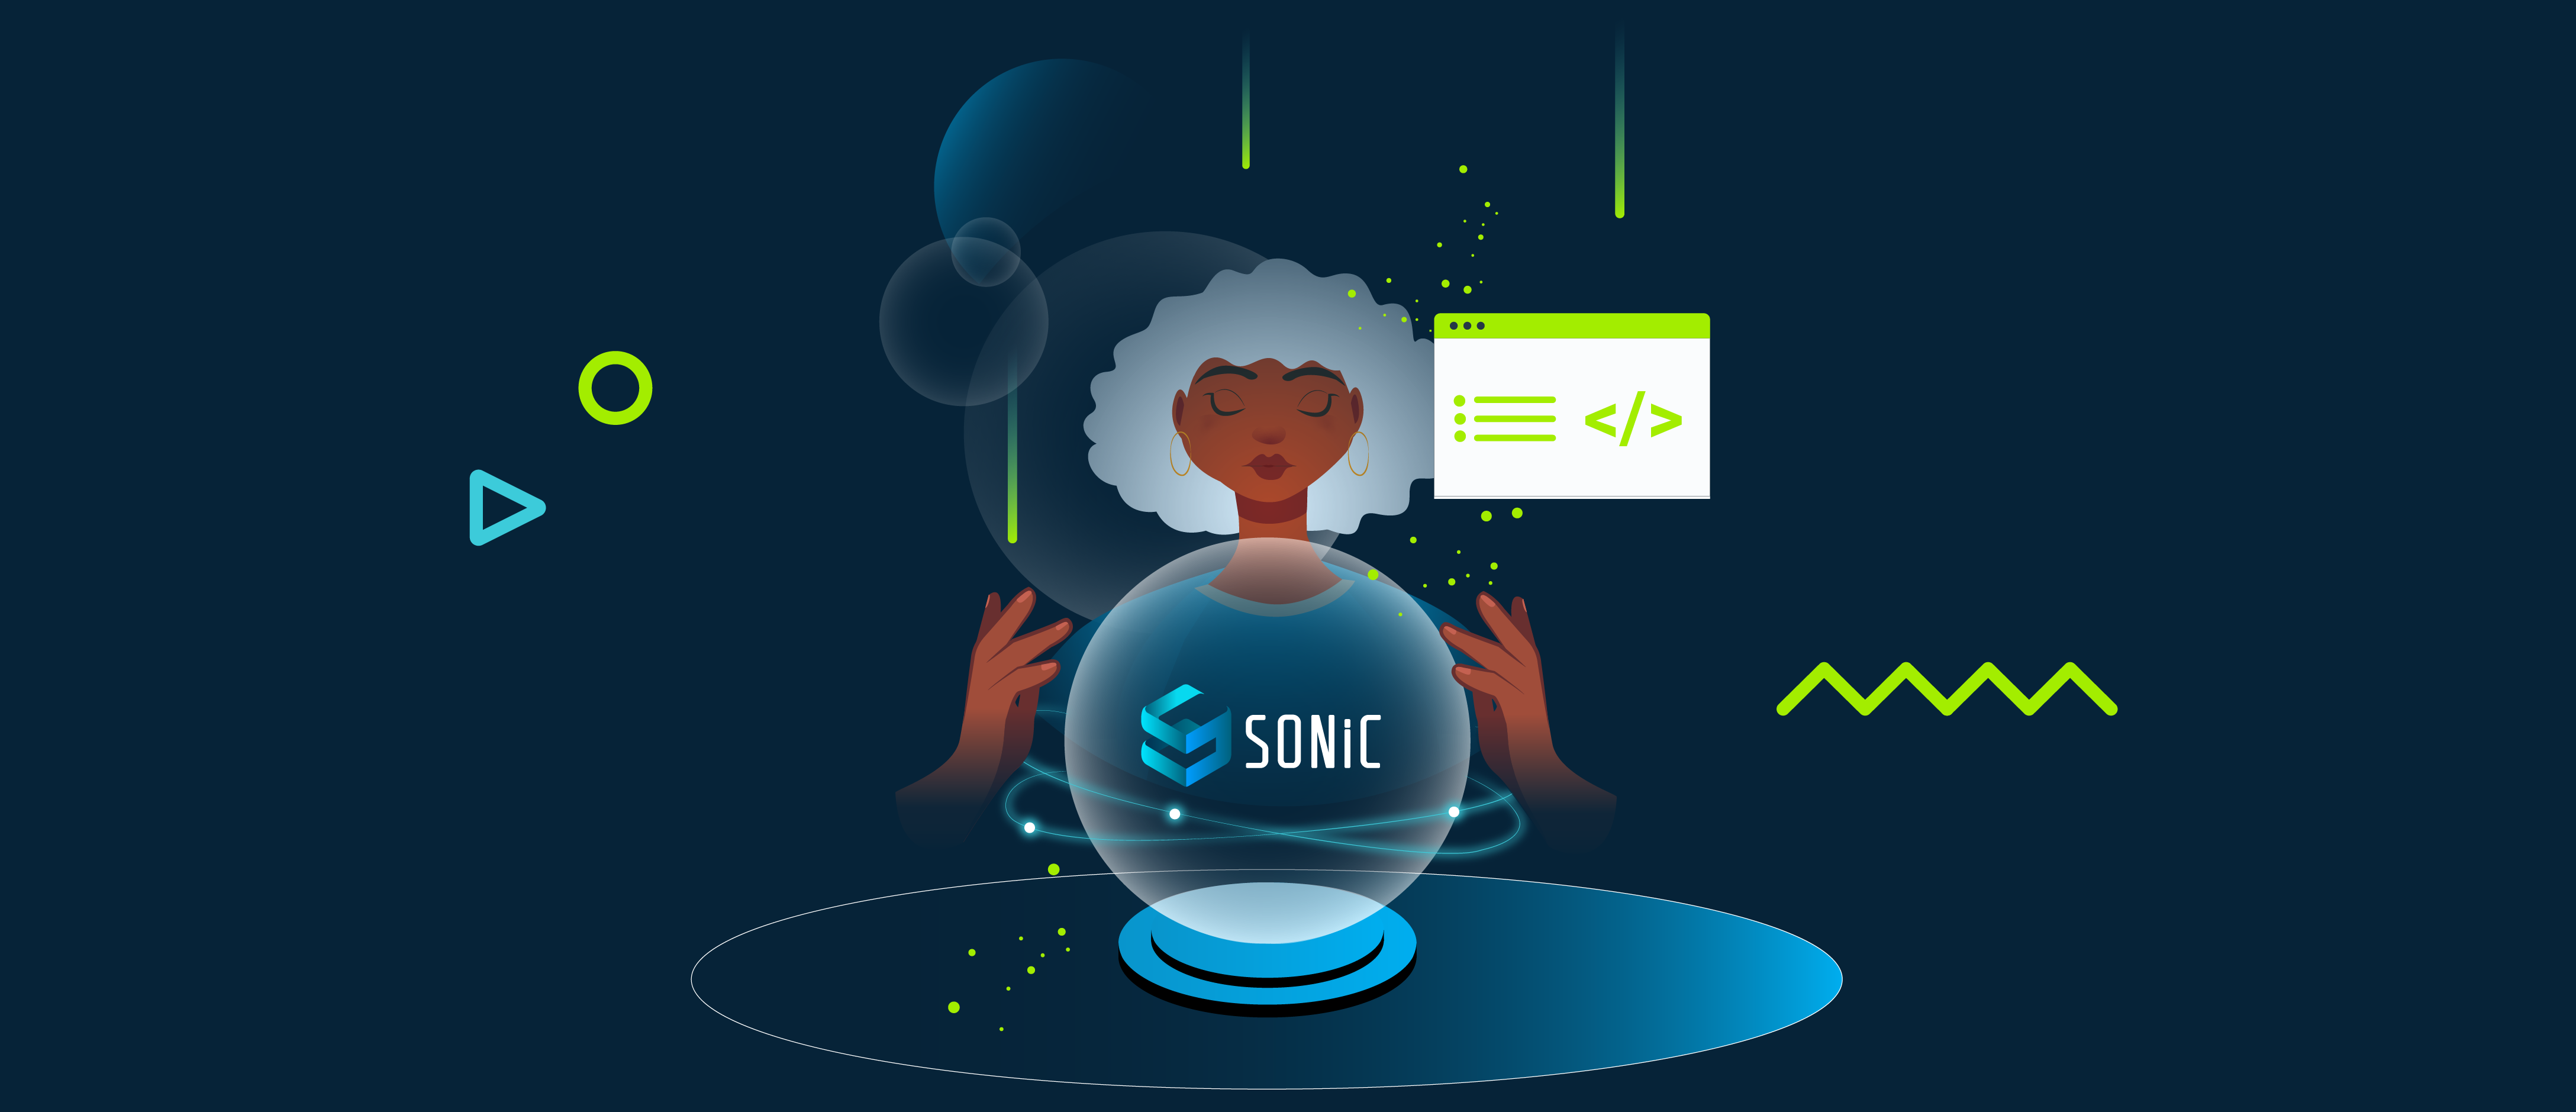 Enhancing SONiC - the process of developing custom network functionality